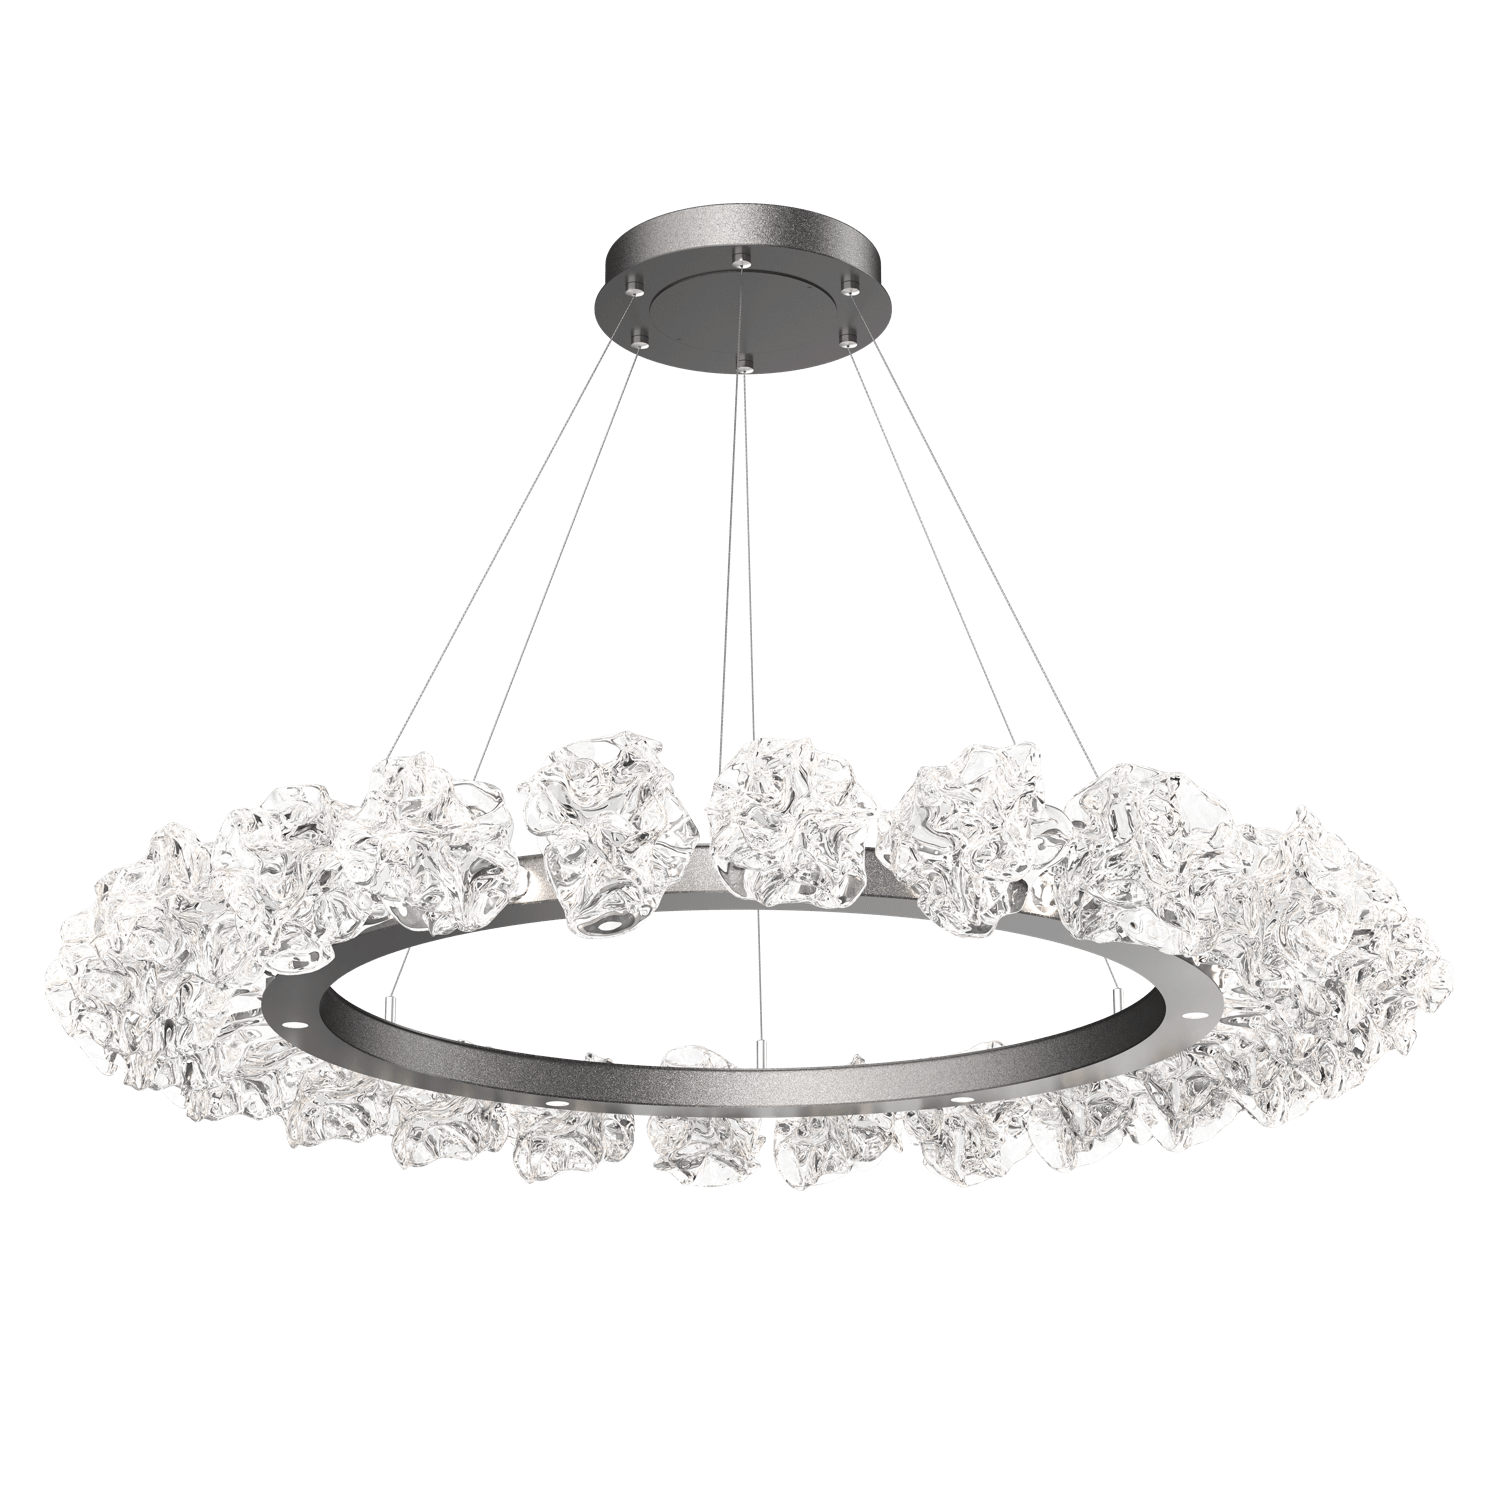 CHB0059-50-GP-Hammerton-Studio-Blossom-50-inch-radial-ring-chandelier-with-graphite-finish-and-clear-handblown-crystal-glass-shades-and-LED-lamping